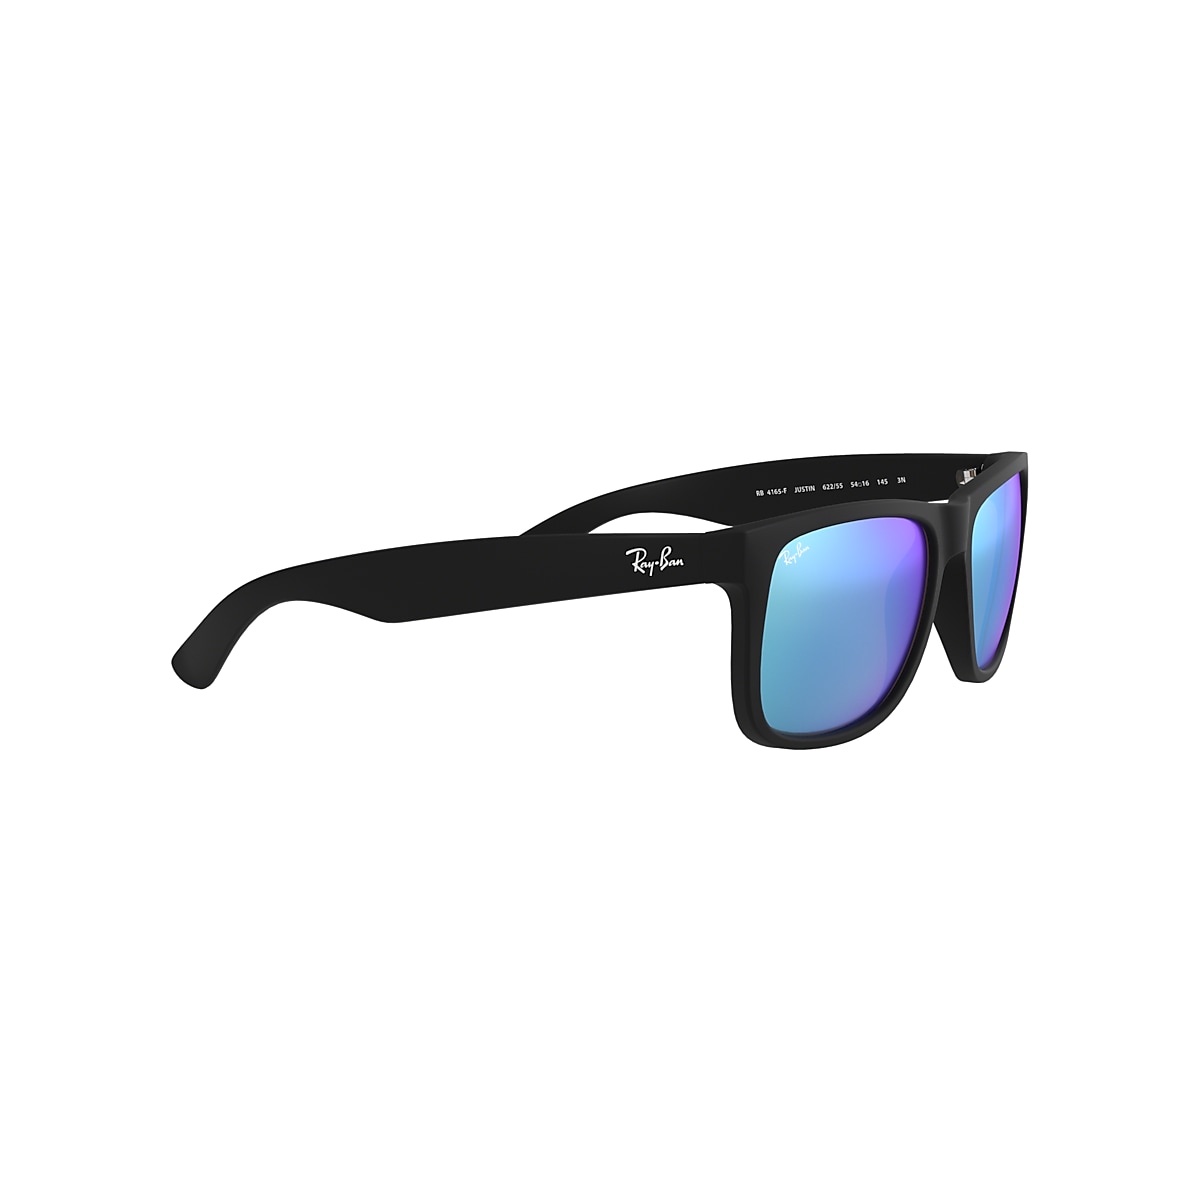 JUSTIN COLOR MIX Sunglasses in Black and Blue - RB4165F | Ray-Ban® US